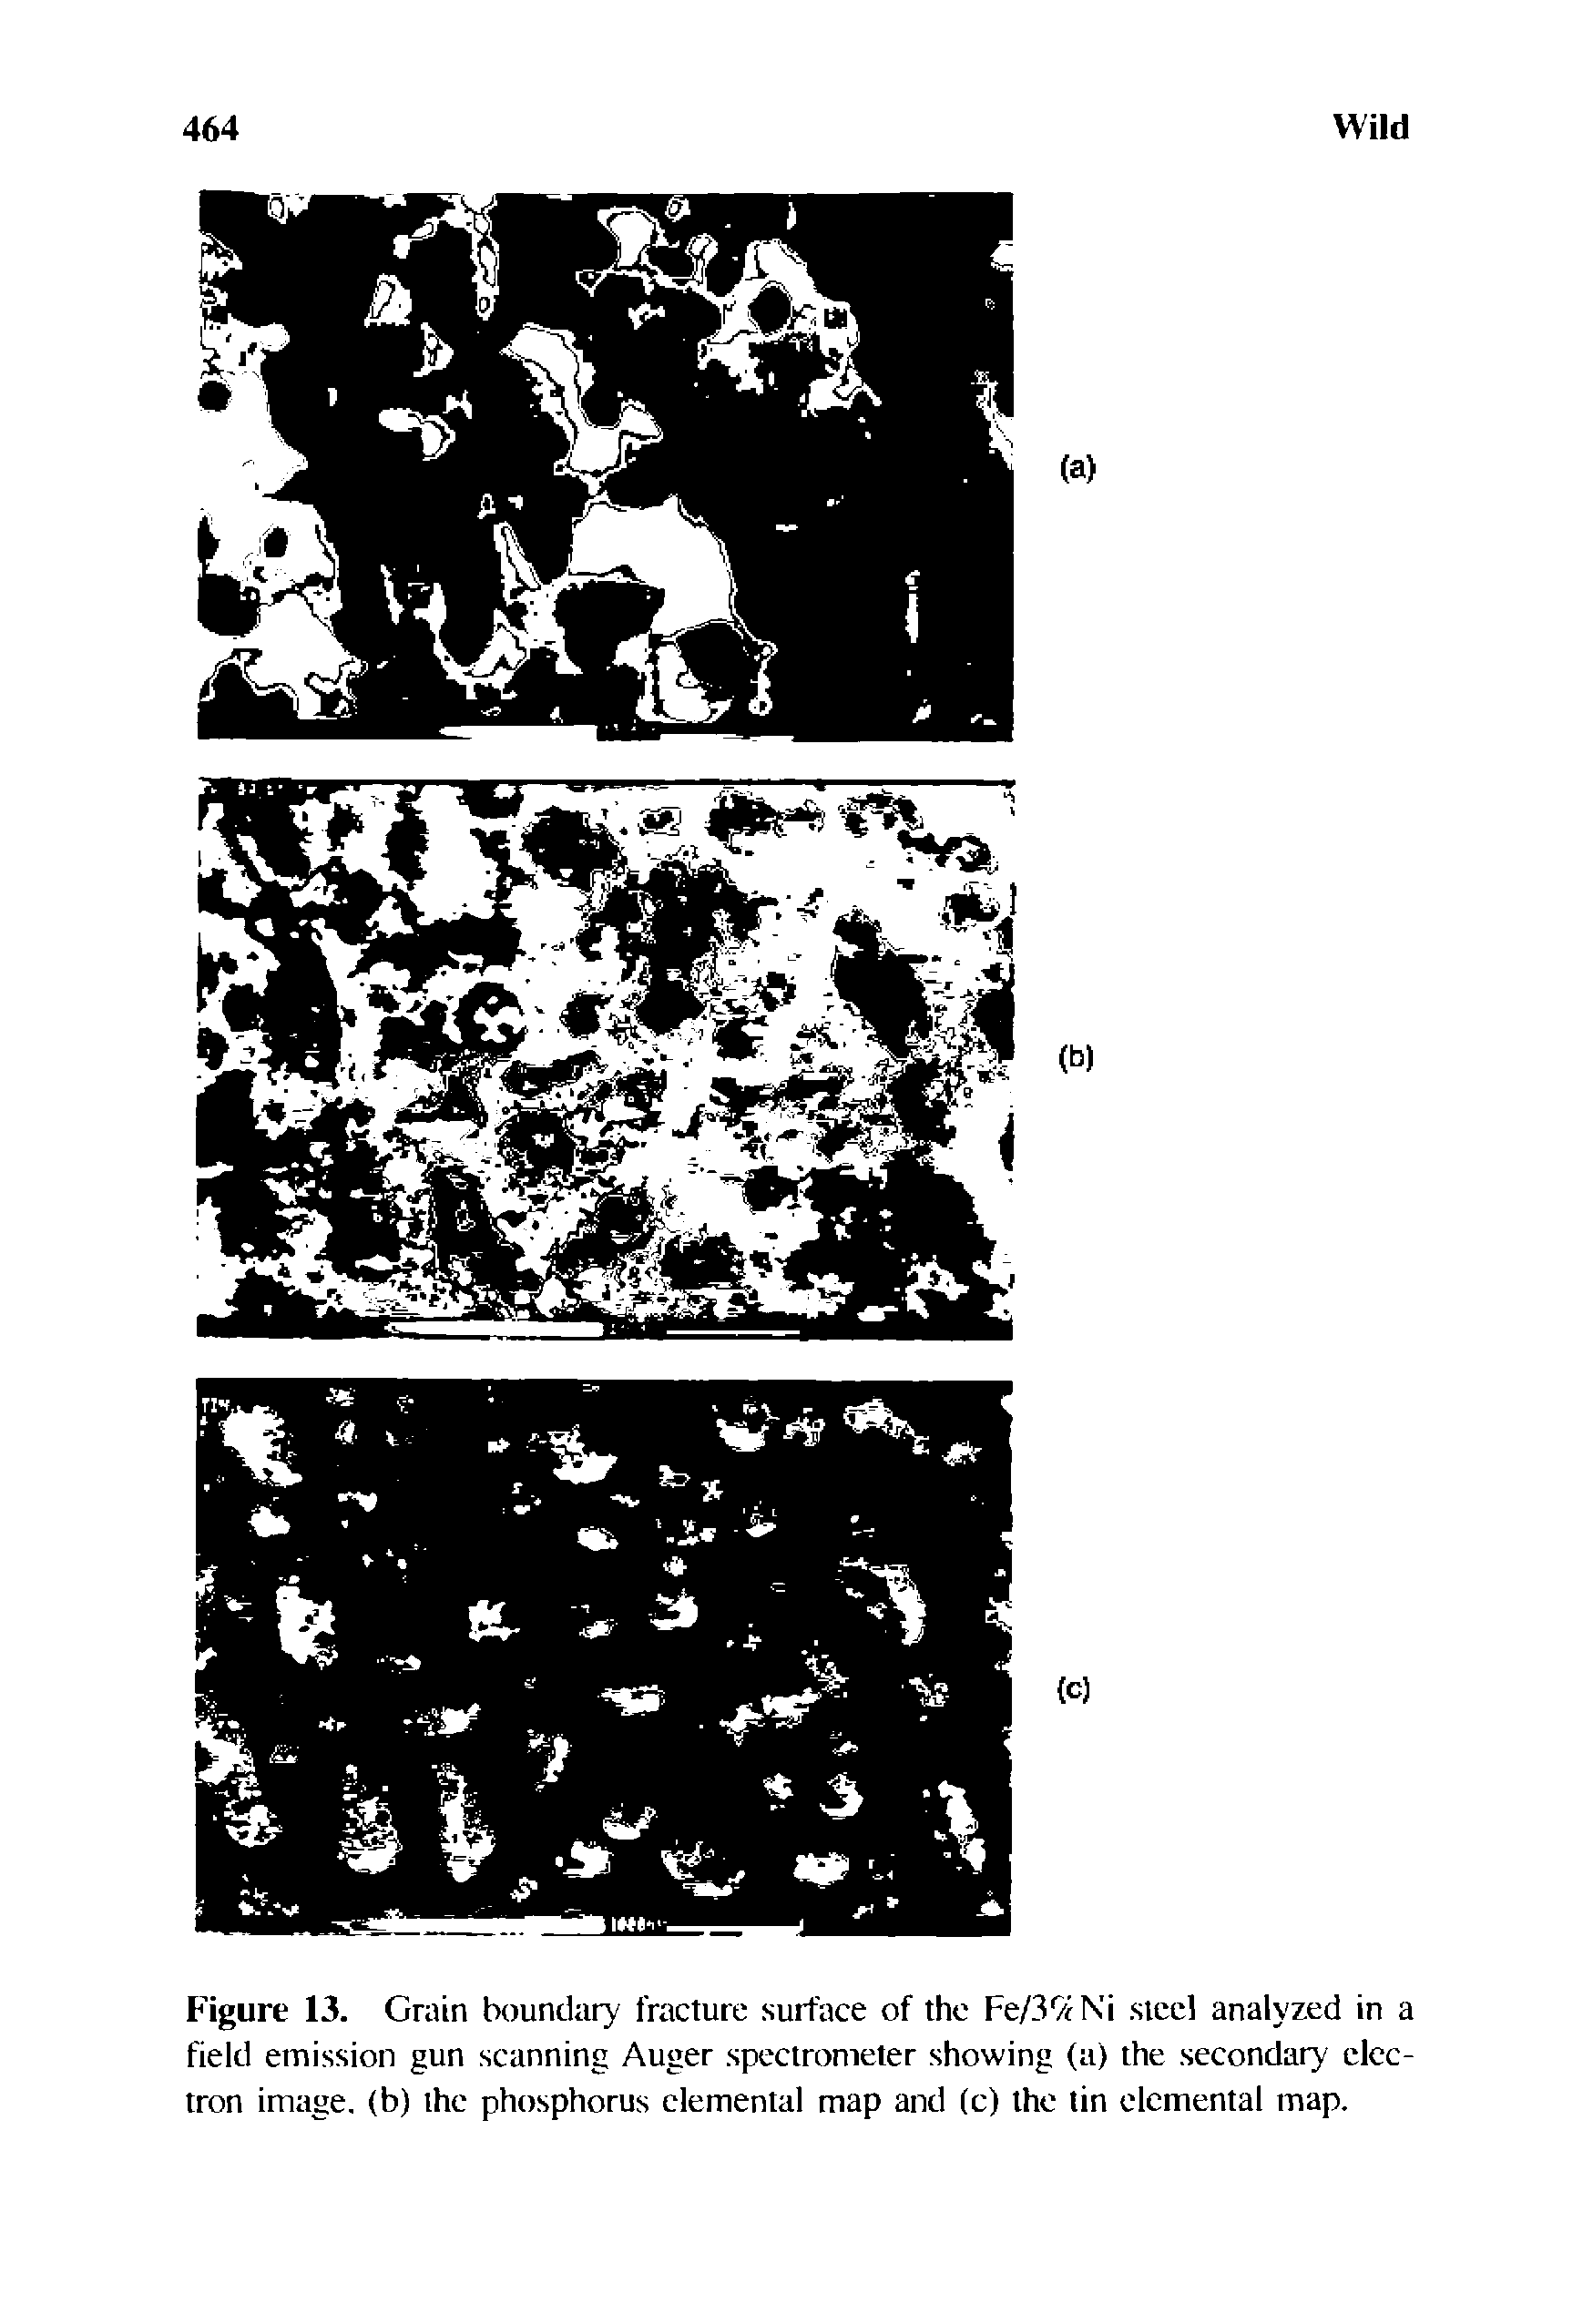 Figure 13. Grain boundary fracture surface of the Fe/39fNi steel analyzed in a field emission gun scanning Auger spectrometer showing (a) the secondary electron image, (b) the phosphorus elemental map and (c) the tin elemental map.